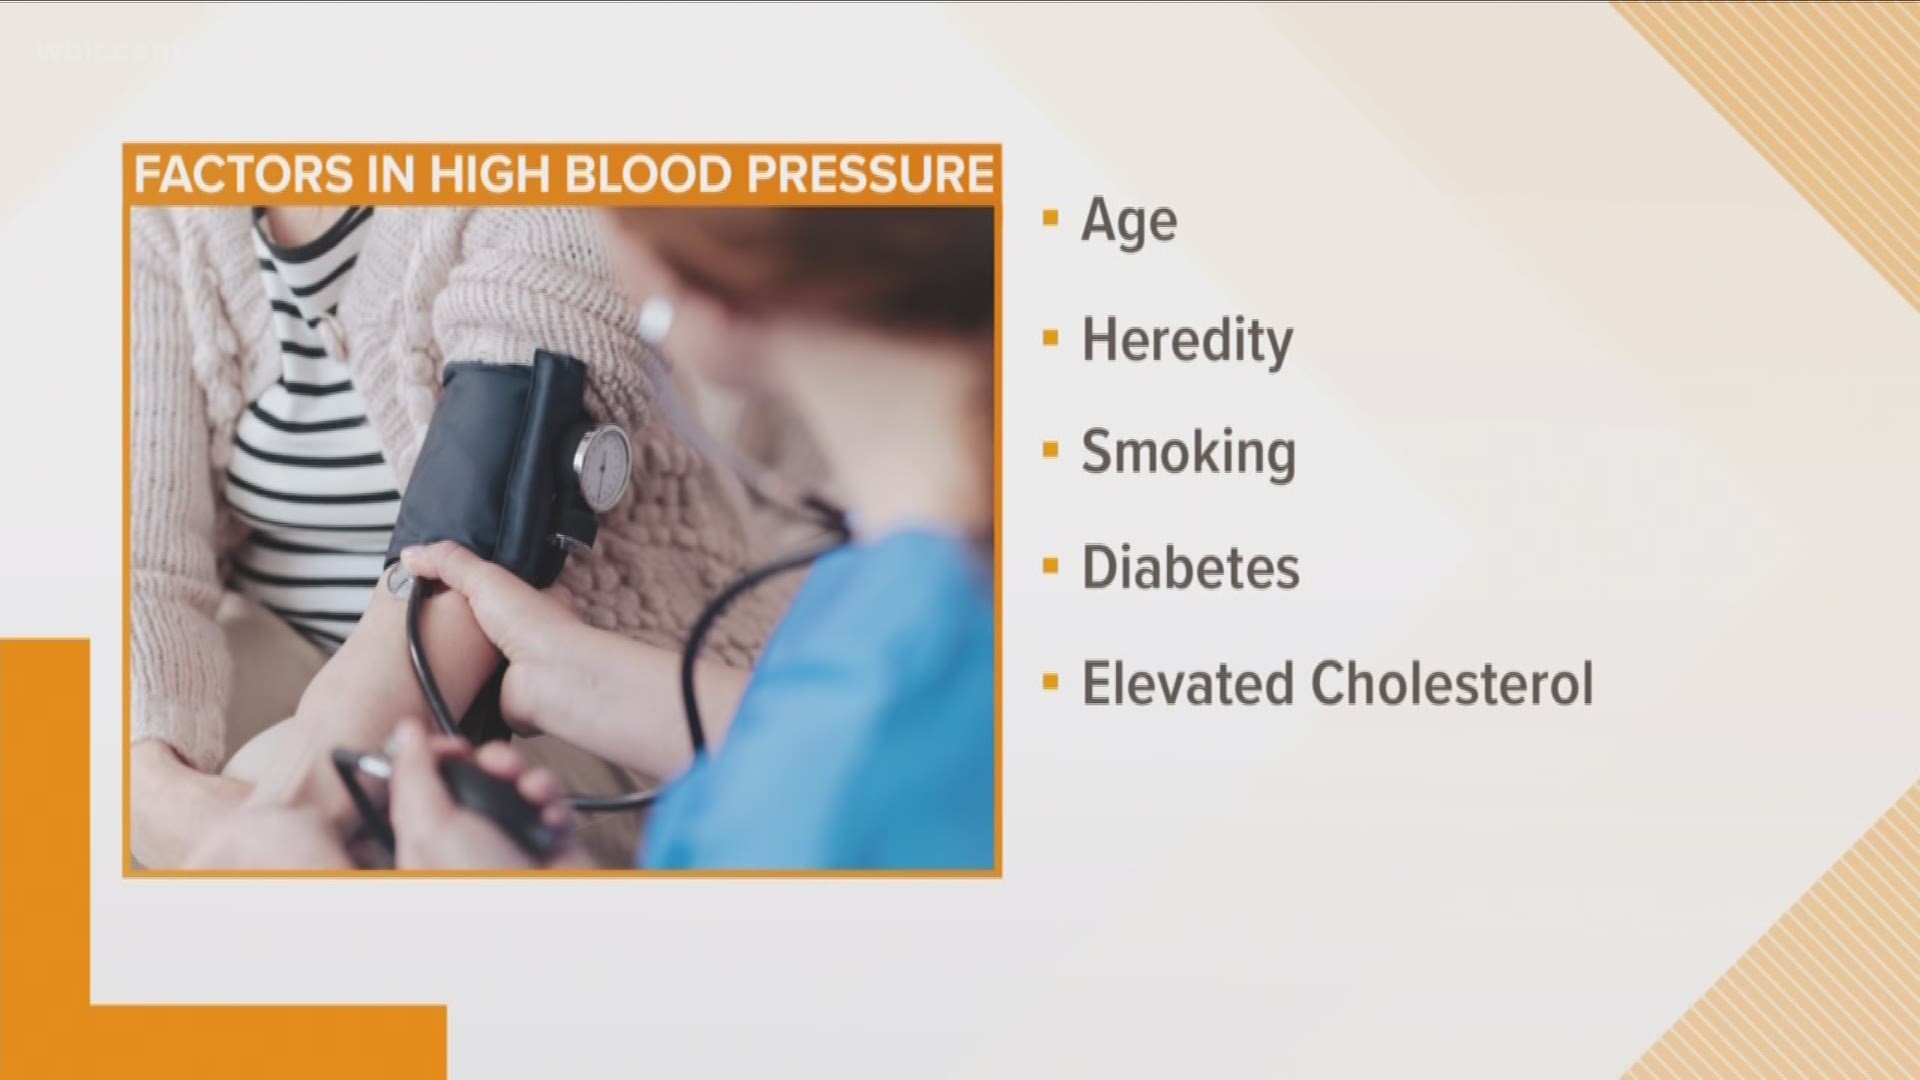 75 million people in the U.S. Have hypertension.  
Dr. Bob is here to discuss why people get high blood pressure and can they prevent hypertension?
Age, Heredity, Smoking, Diabetes, Elevated cholesterol
Question from viewer:  What type exercise is best to